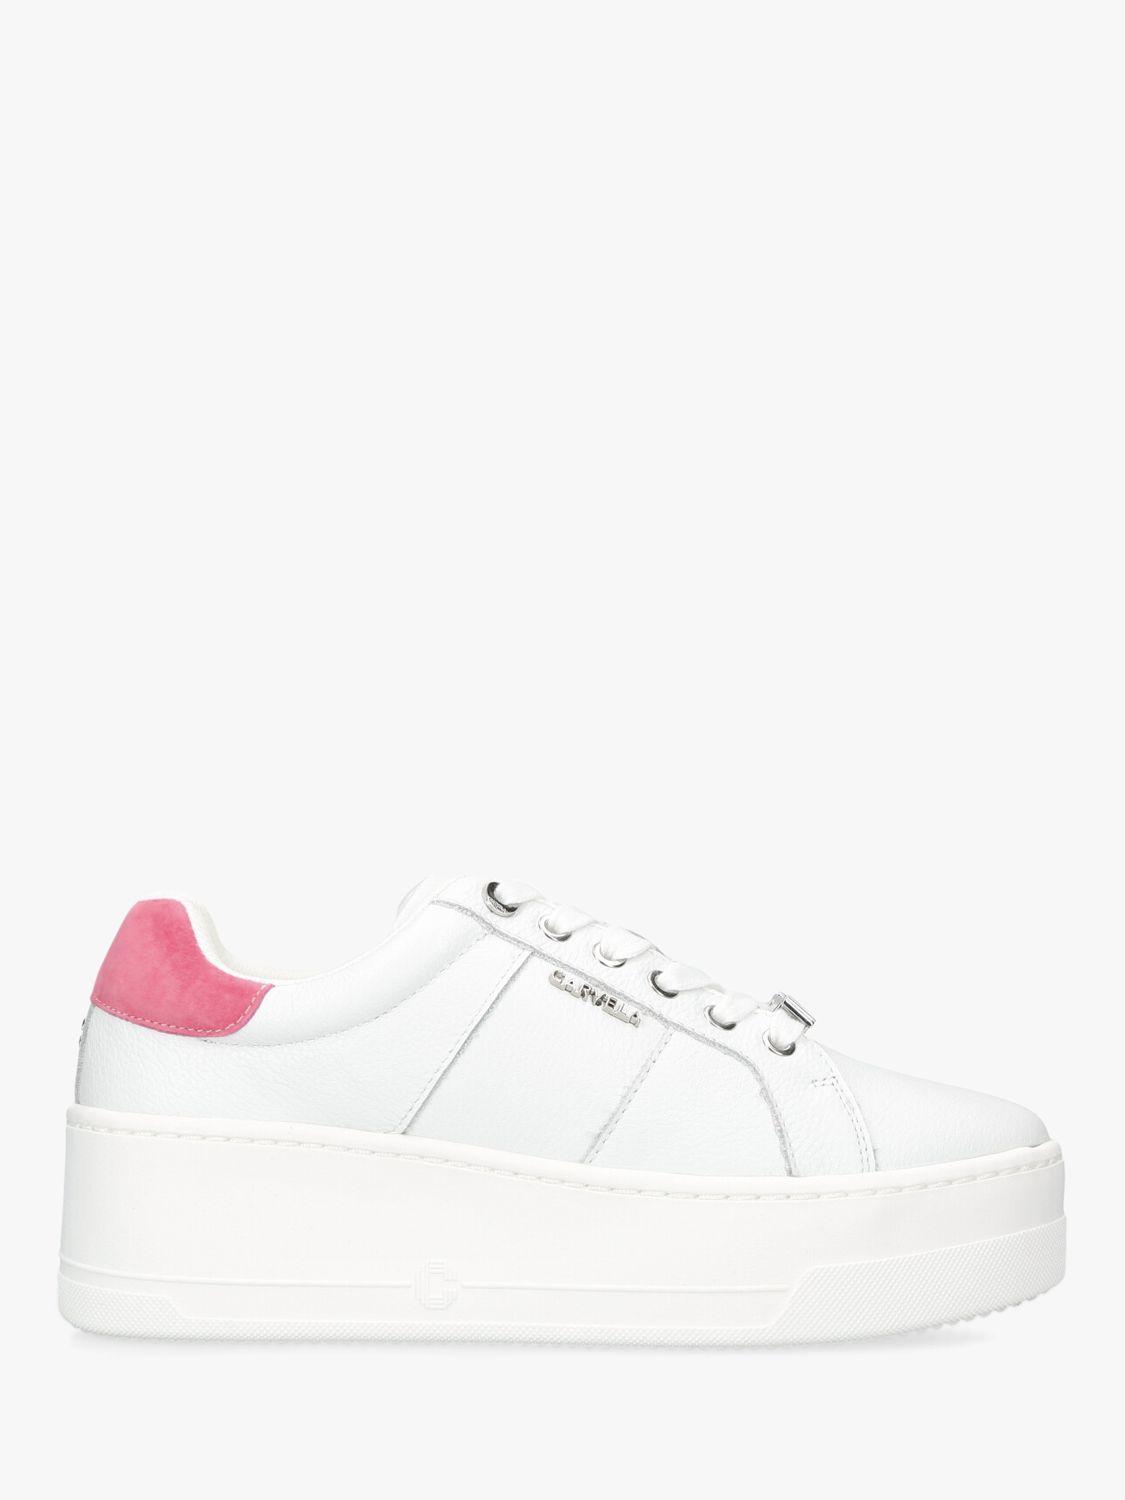 Carvela Kurt Geiger Connected Flatform Chunky Trainers in White | Lyst UK